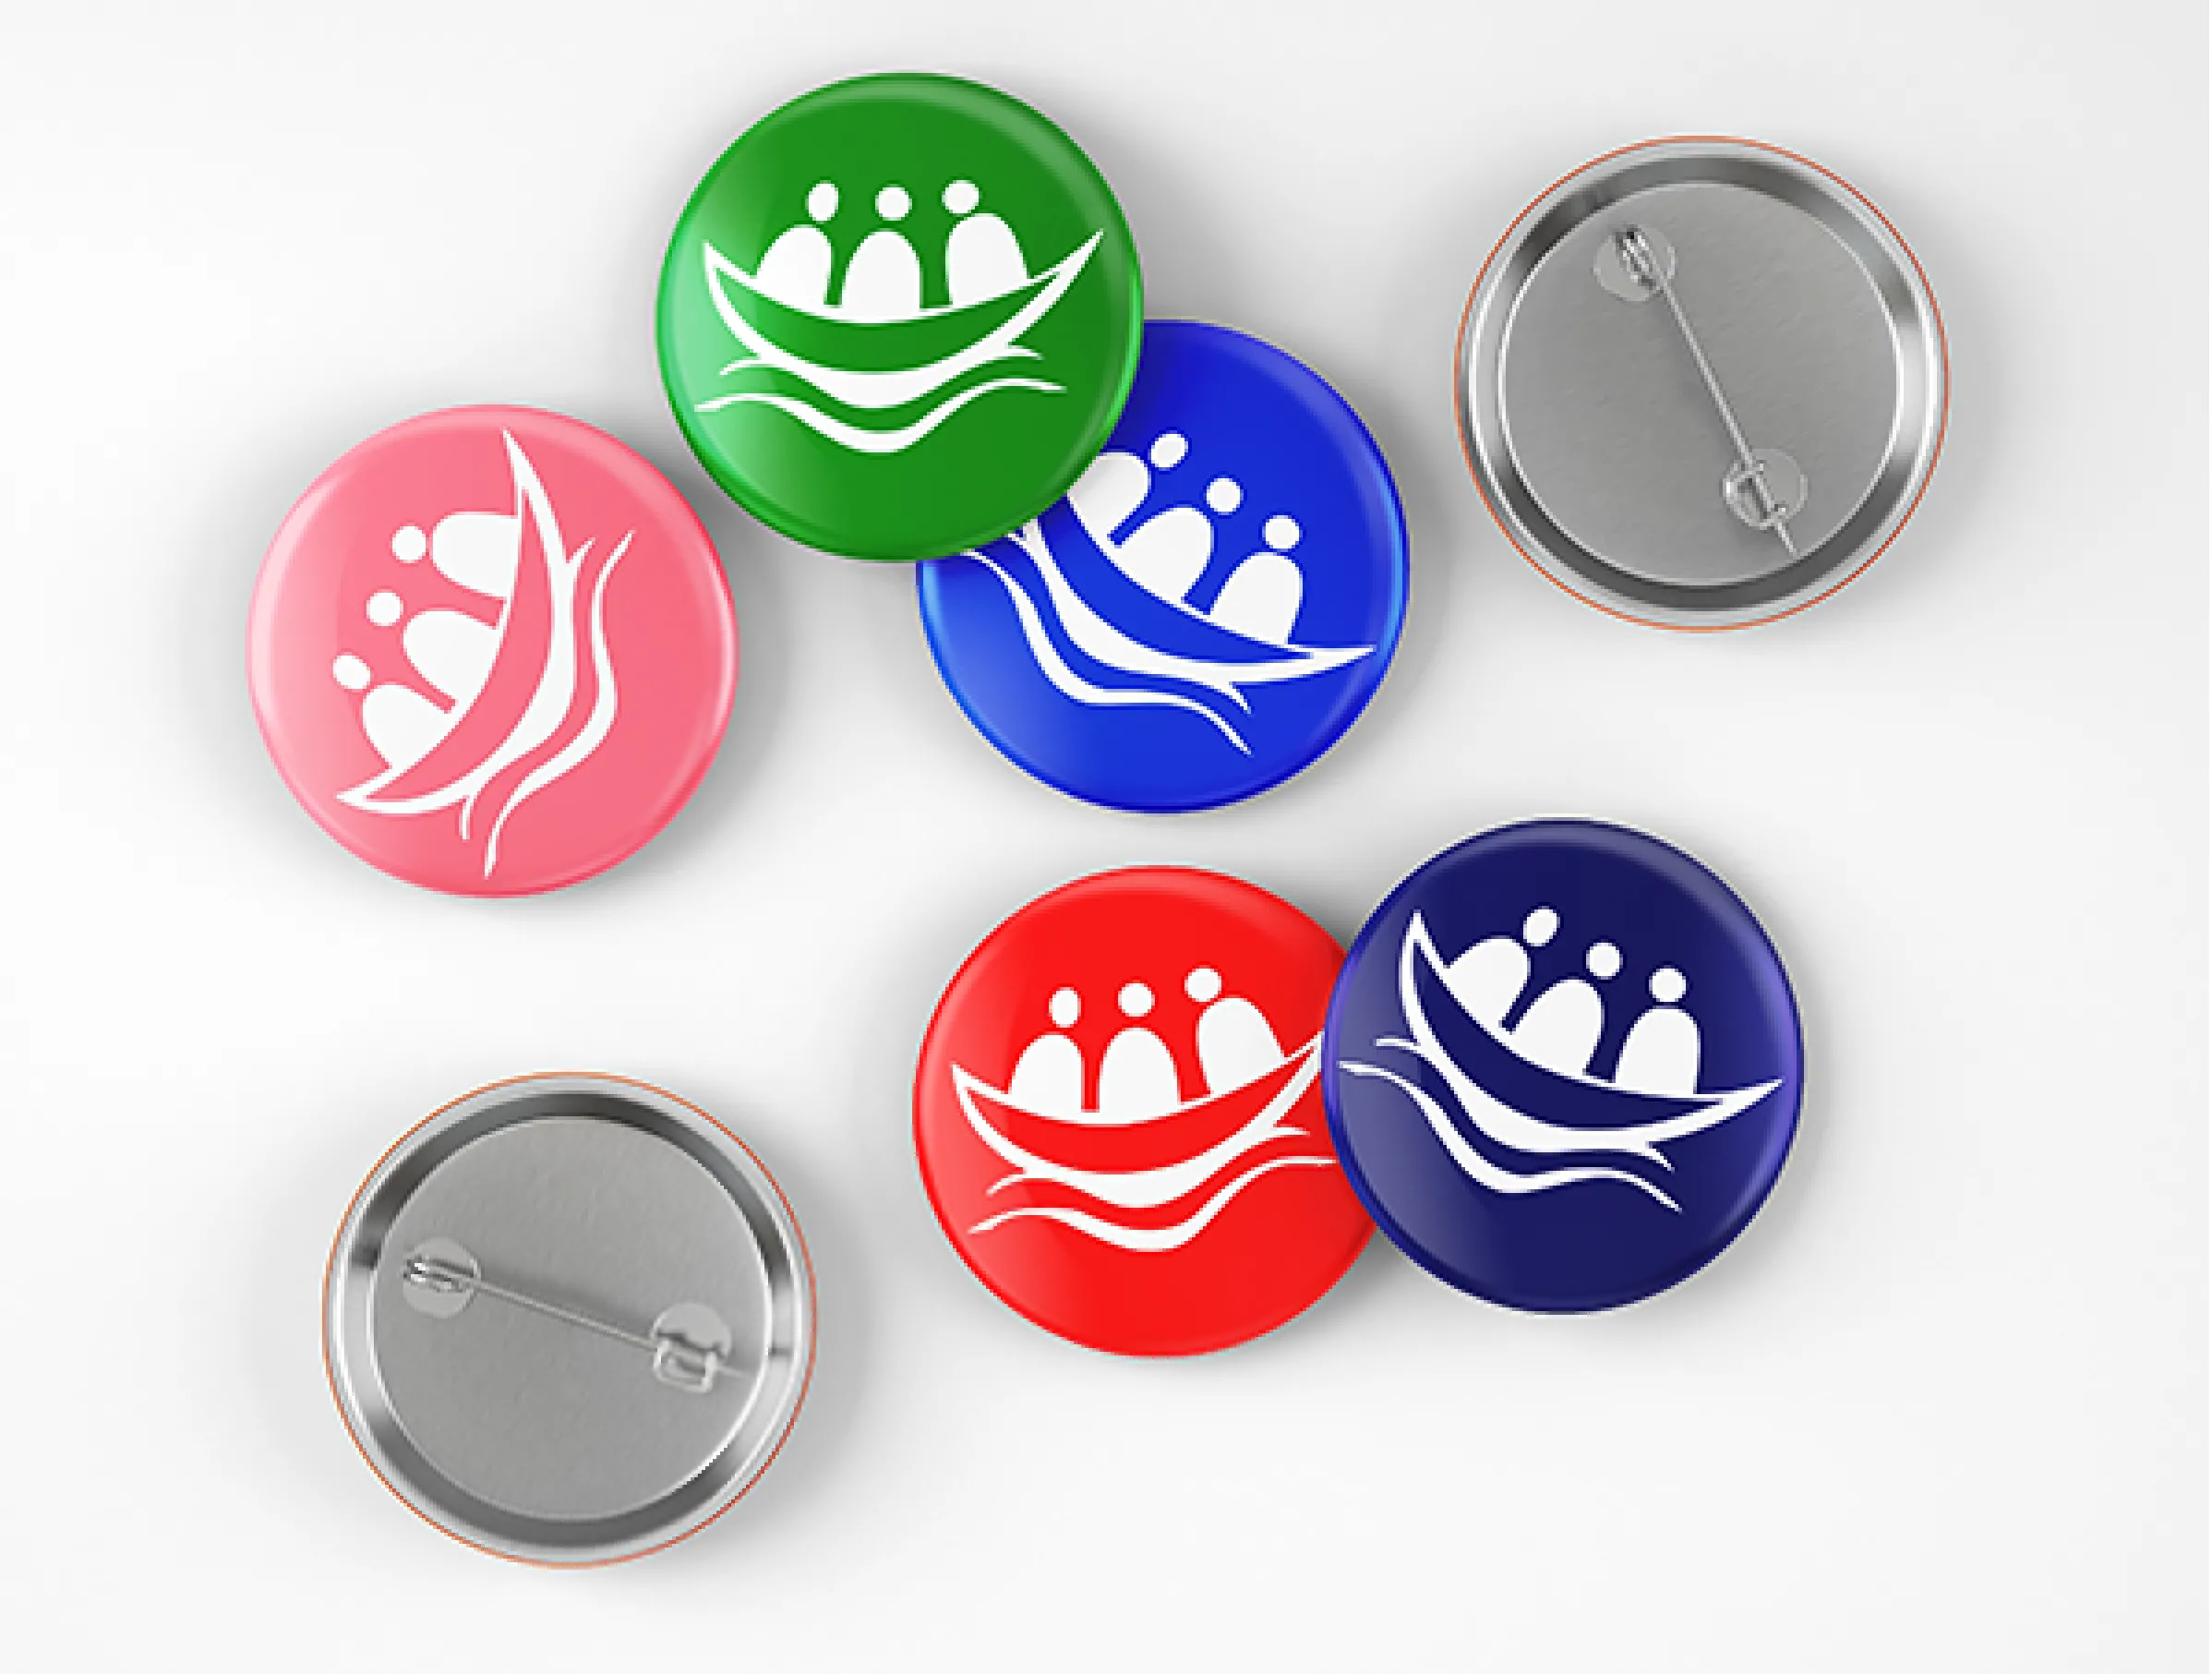 L'arche badges with the logo design on them